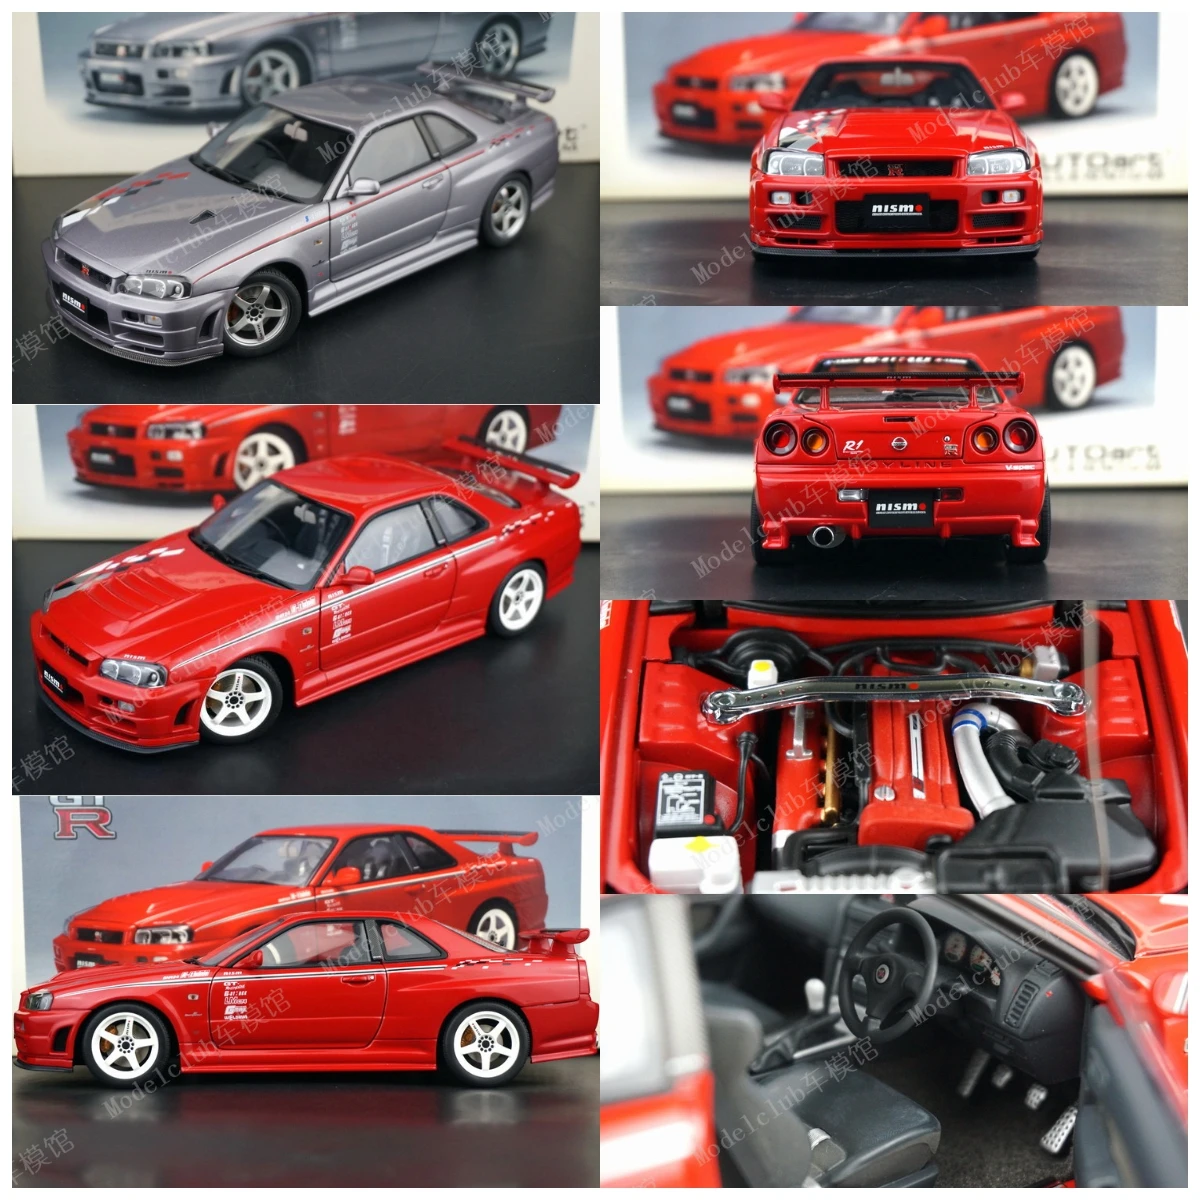 Autoart 1:18 For GTR Nismo R34 S-tune JDM Alloy Full Open Limited Edition  Resin Metal Model Ornament Toy Birthday Gift